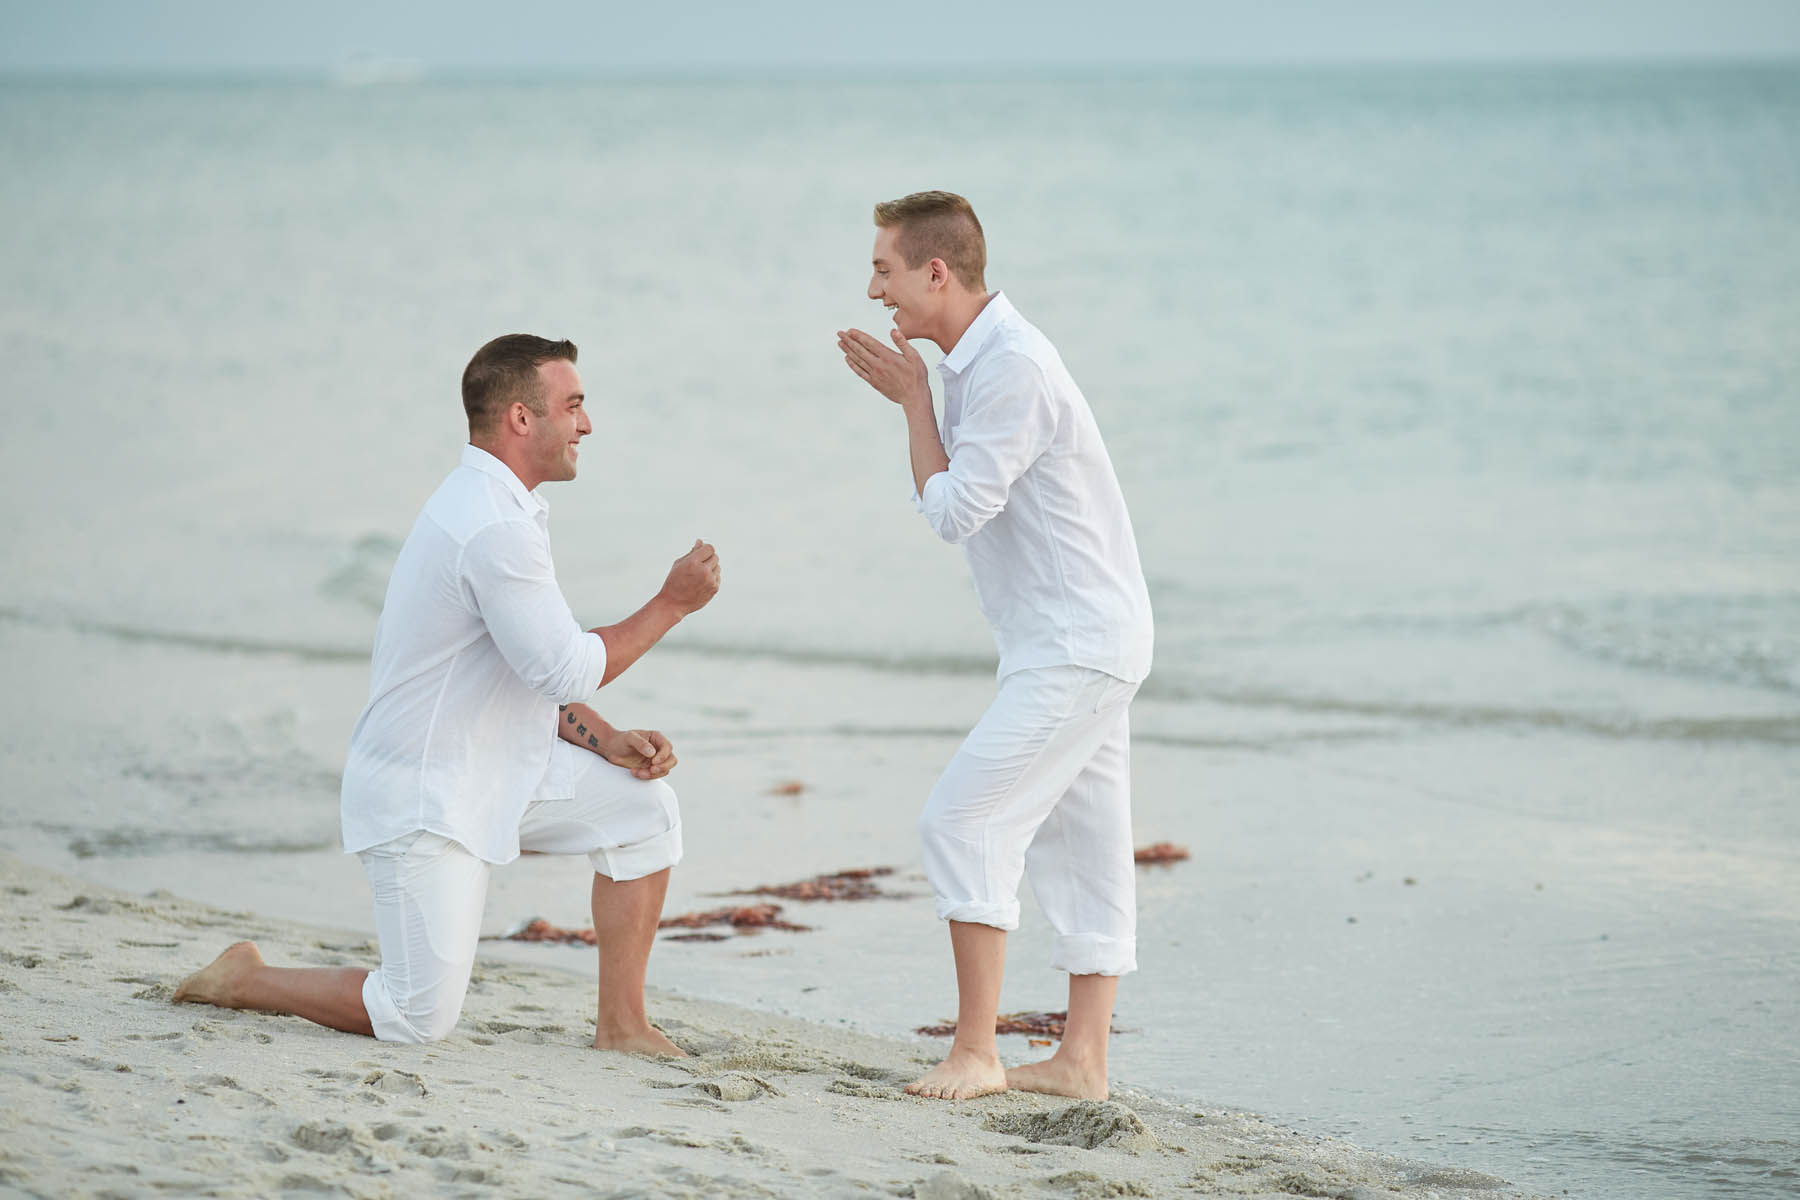 Two white people in front of the ocean, one on a bended knee proposing.